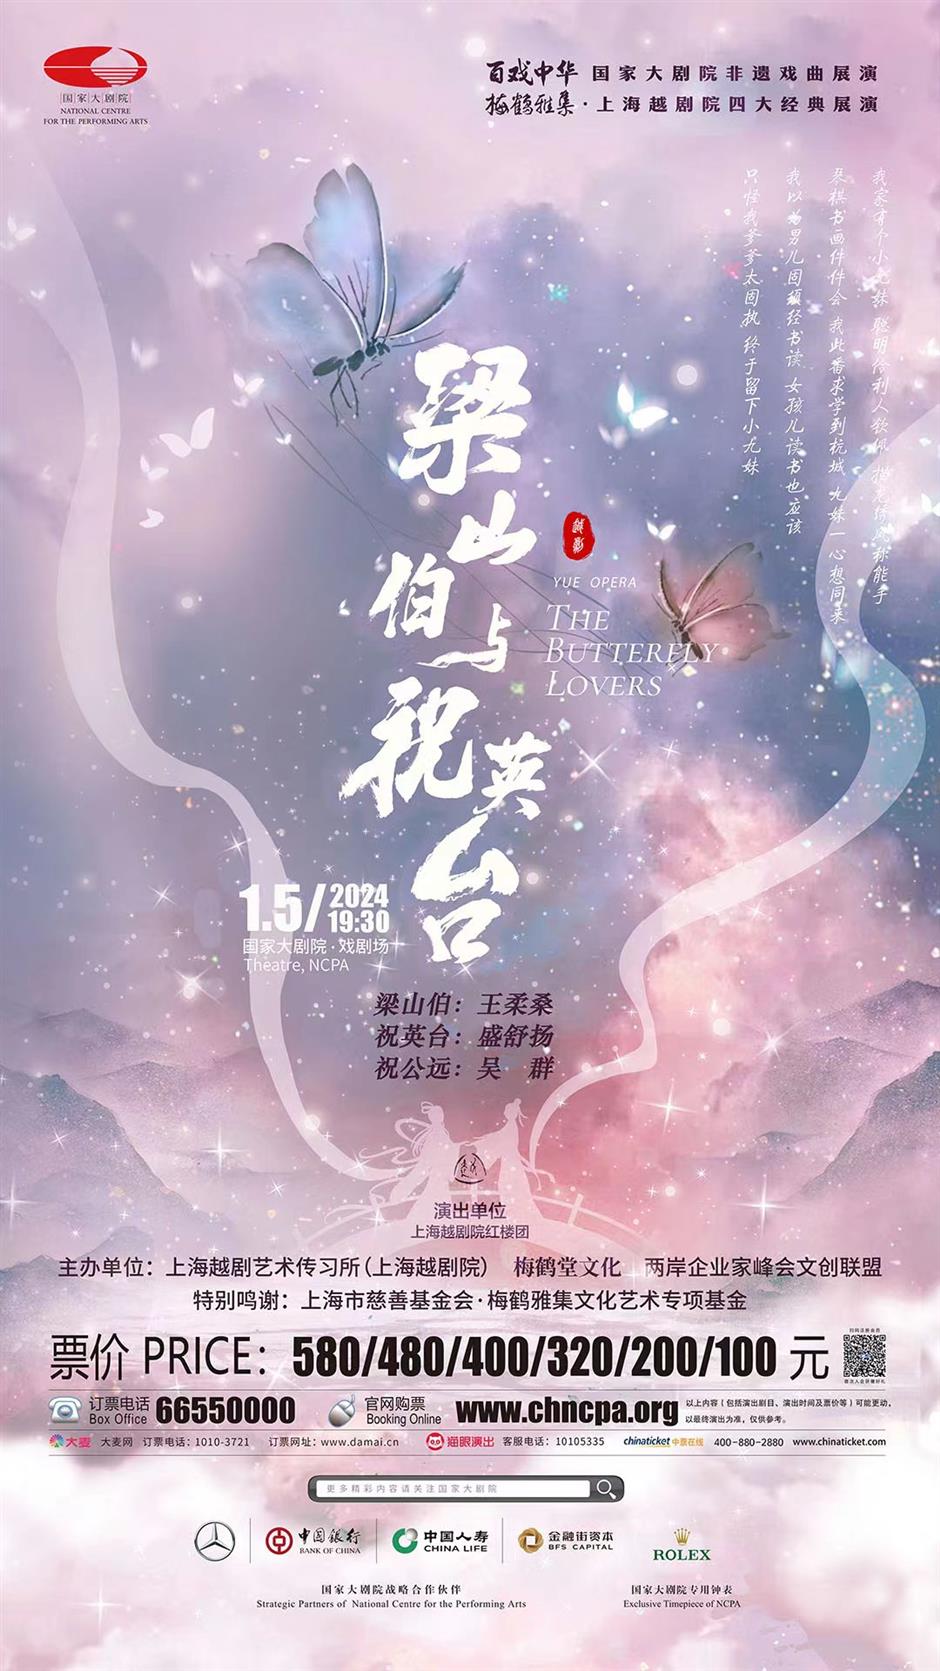 Shanghai company takes classic plays to Beijing